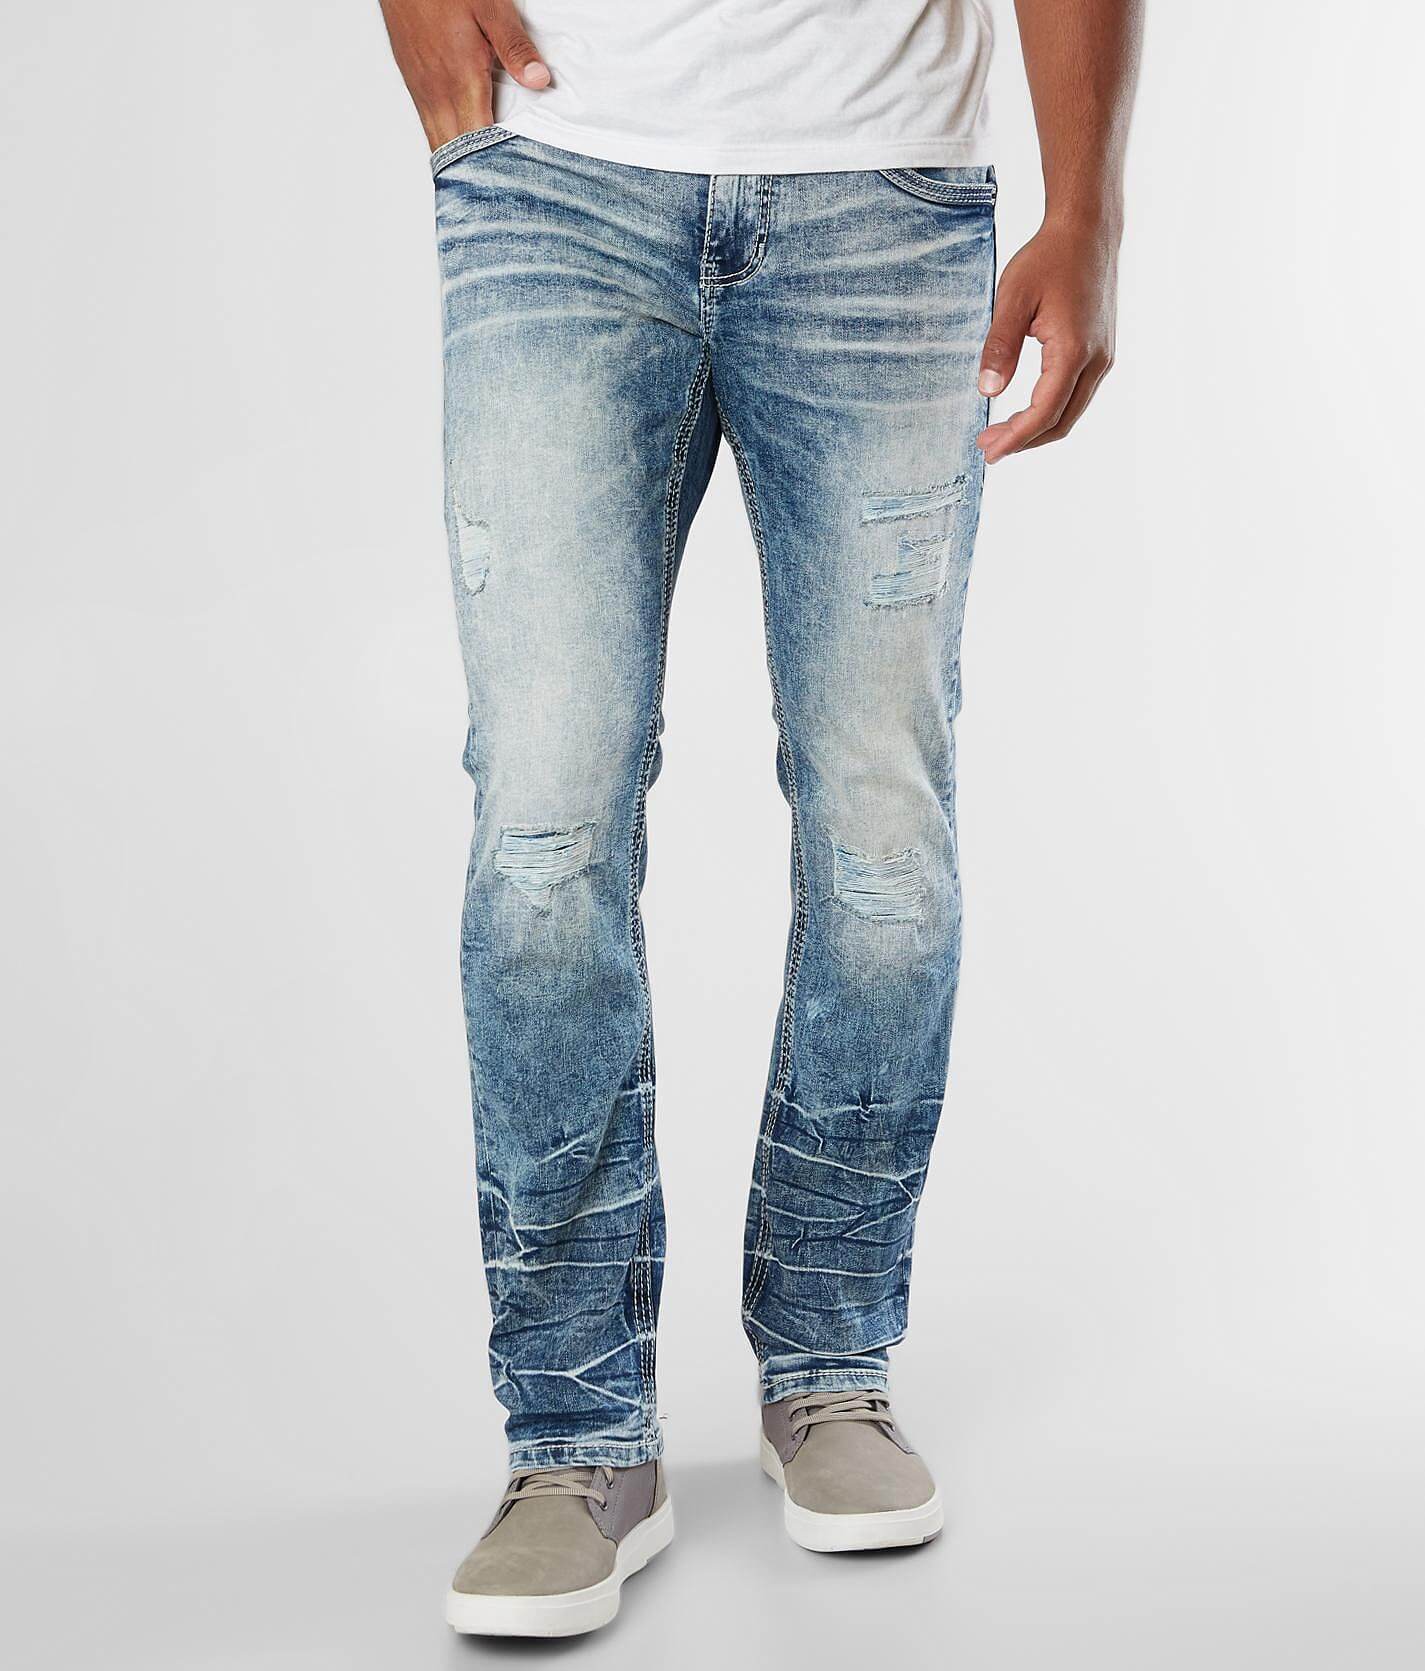 american fighter jeans mens